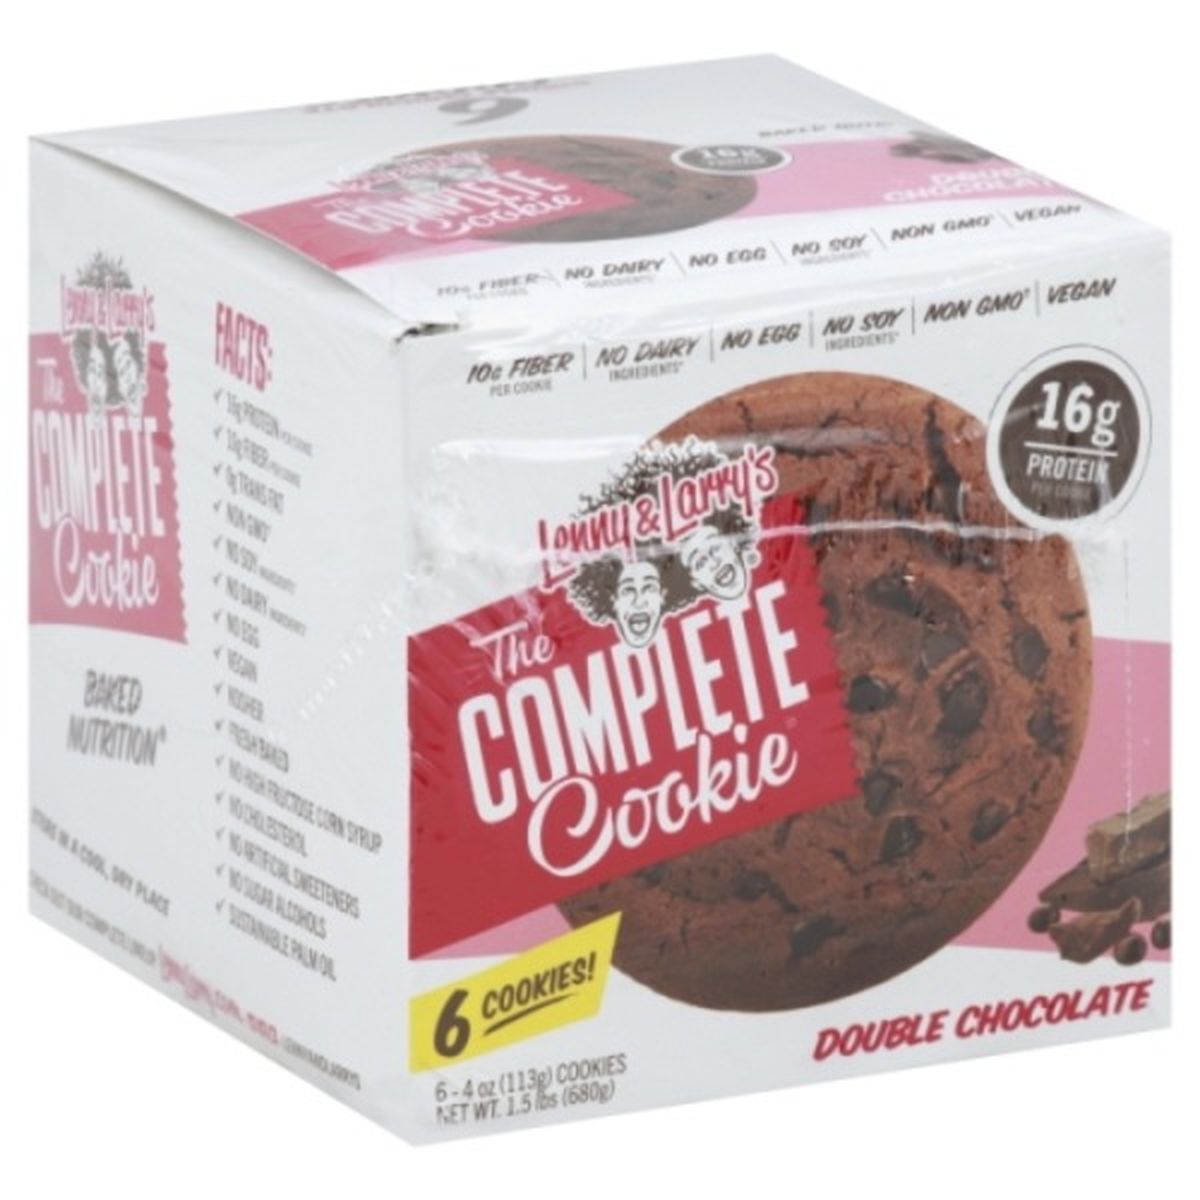 Calories in Lenny & Larry's Cookie, The Complete, Double Chocolate